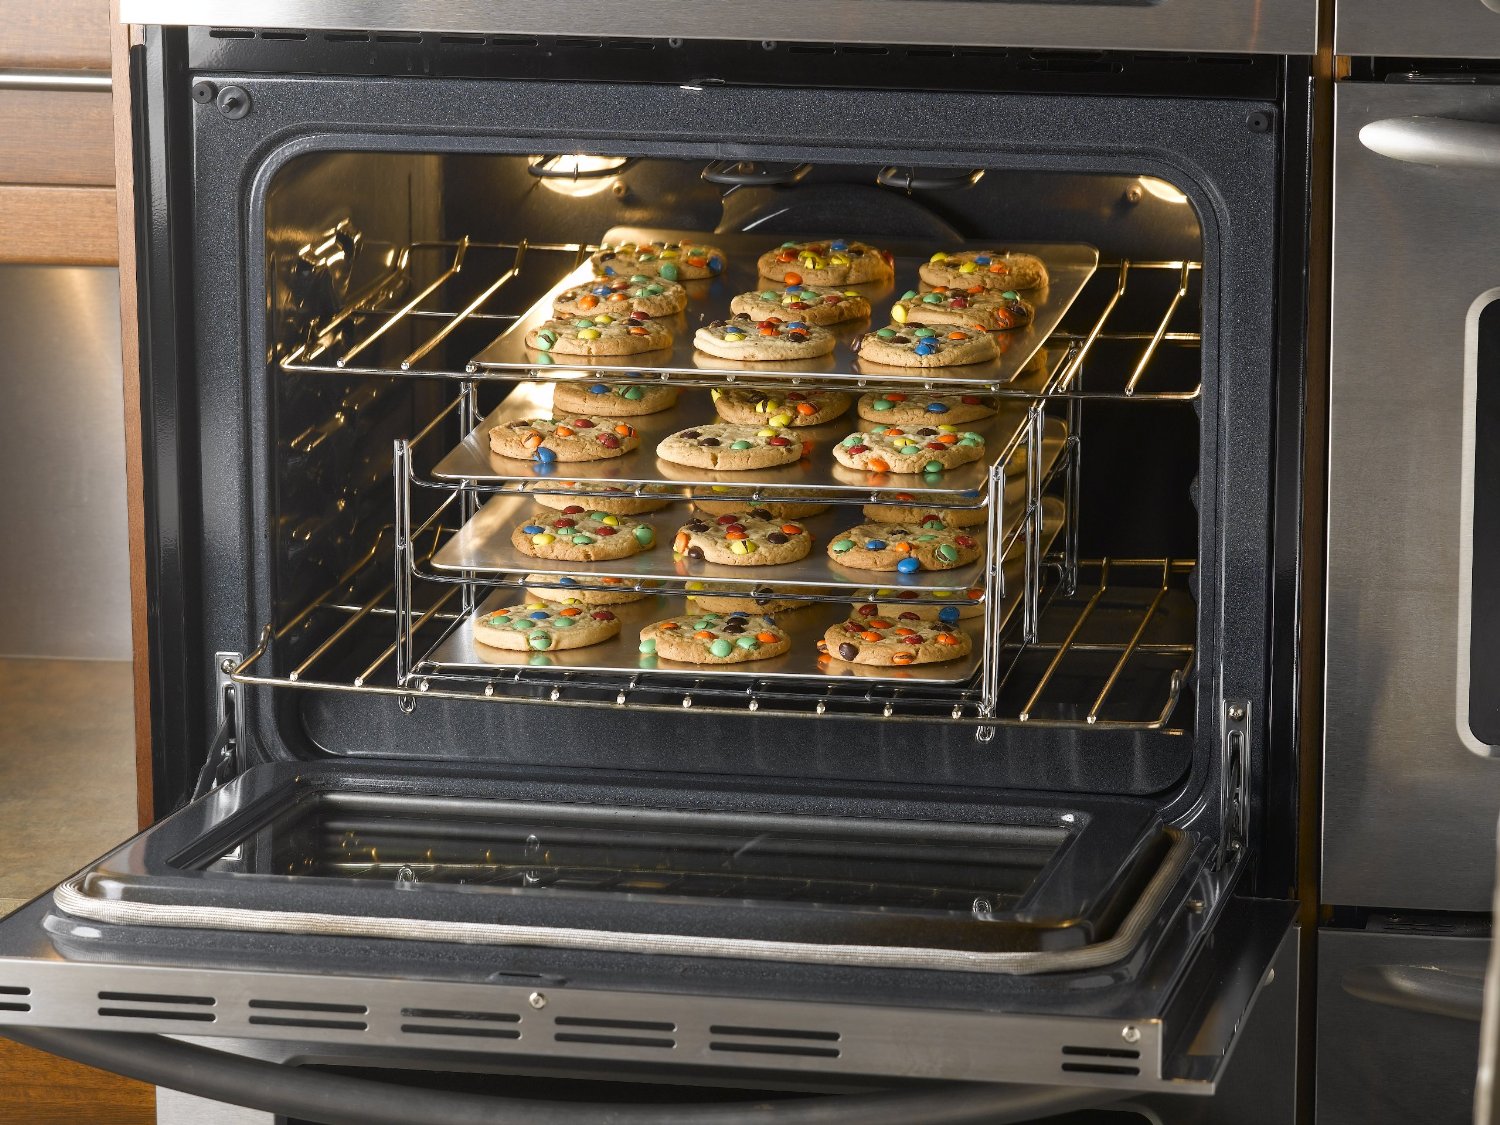 3-in-1 Oven Baking Rack Only $17.99! - Become a Coupon Queen
